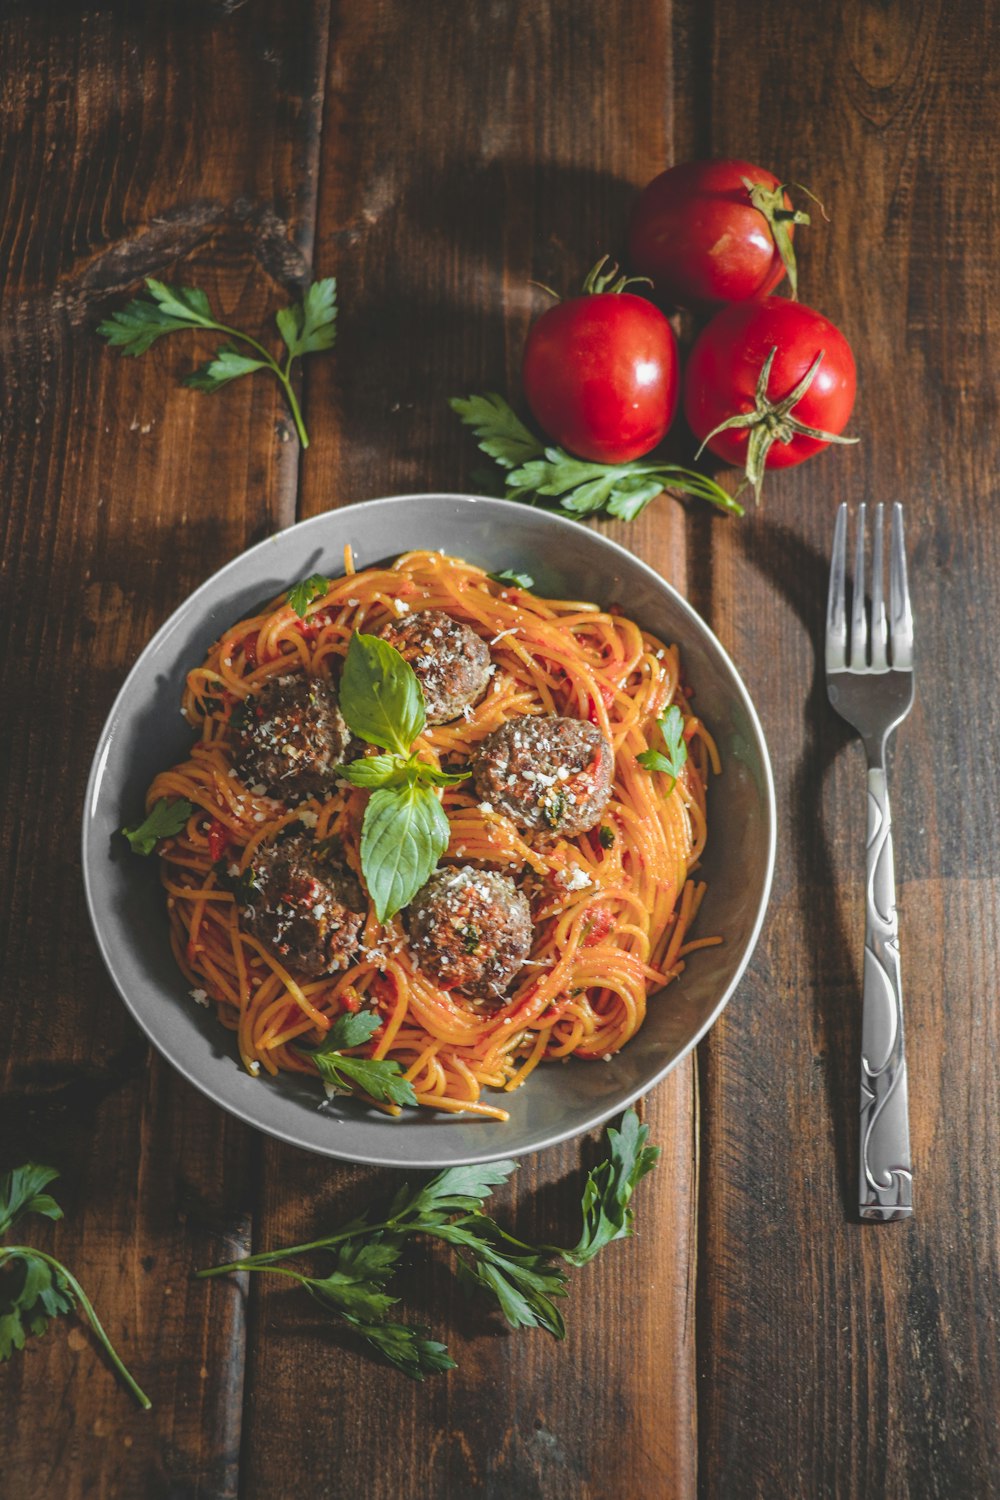 a plate of spaghetti with meatballs and tomatoes